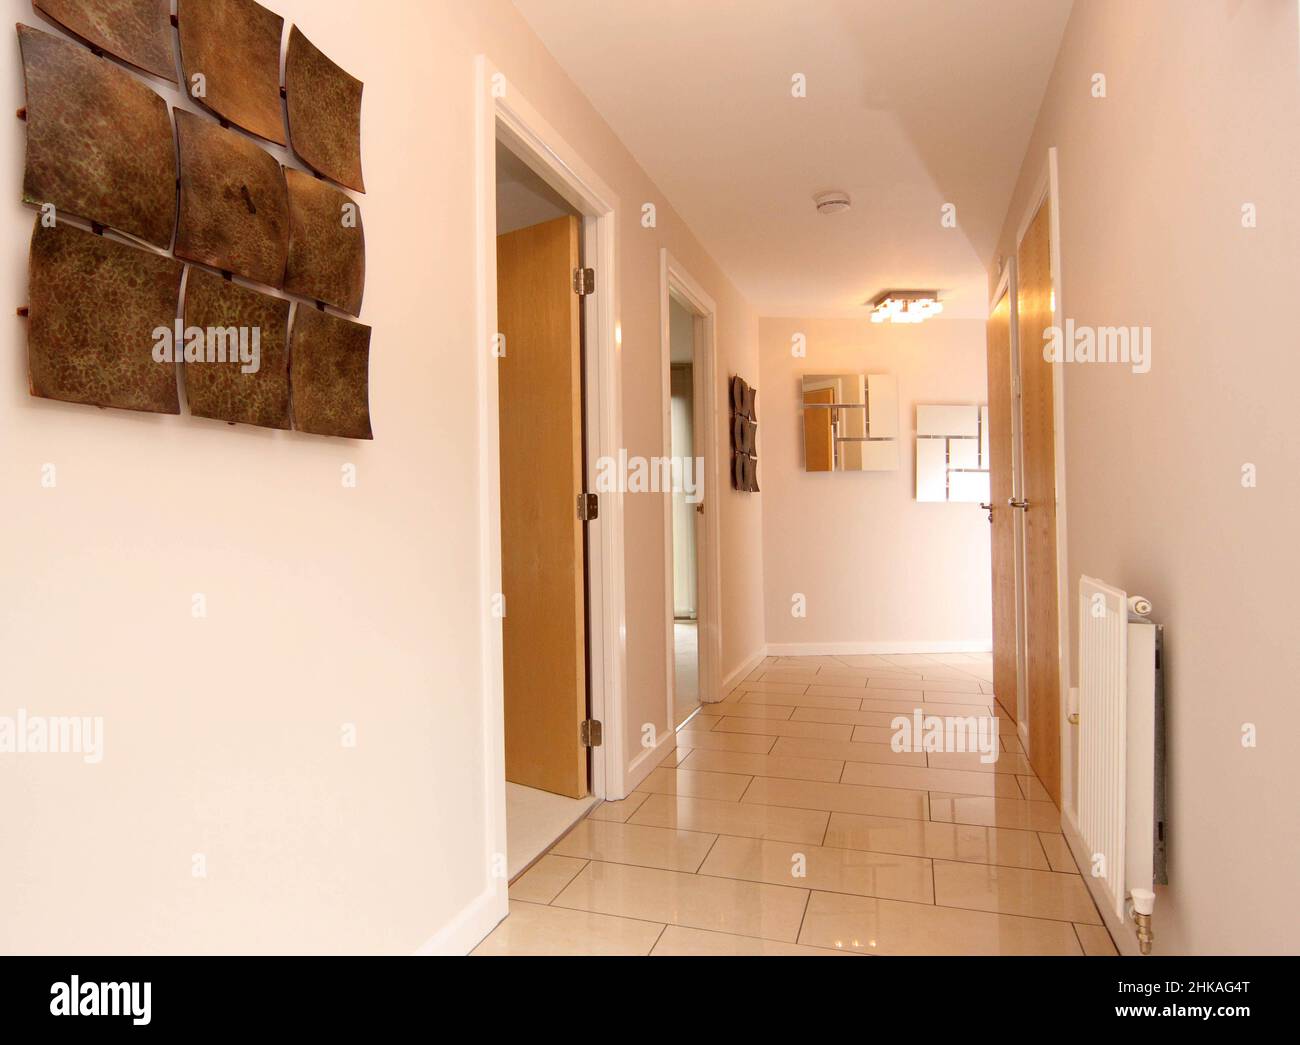 View along a corridor passageway with tiled floor in modern house property,doors off to other room, modern aspect. Stock Photo